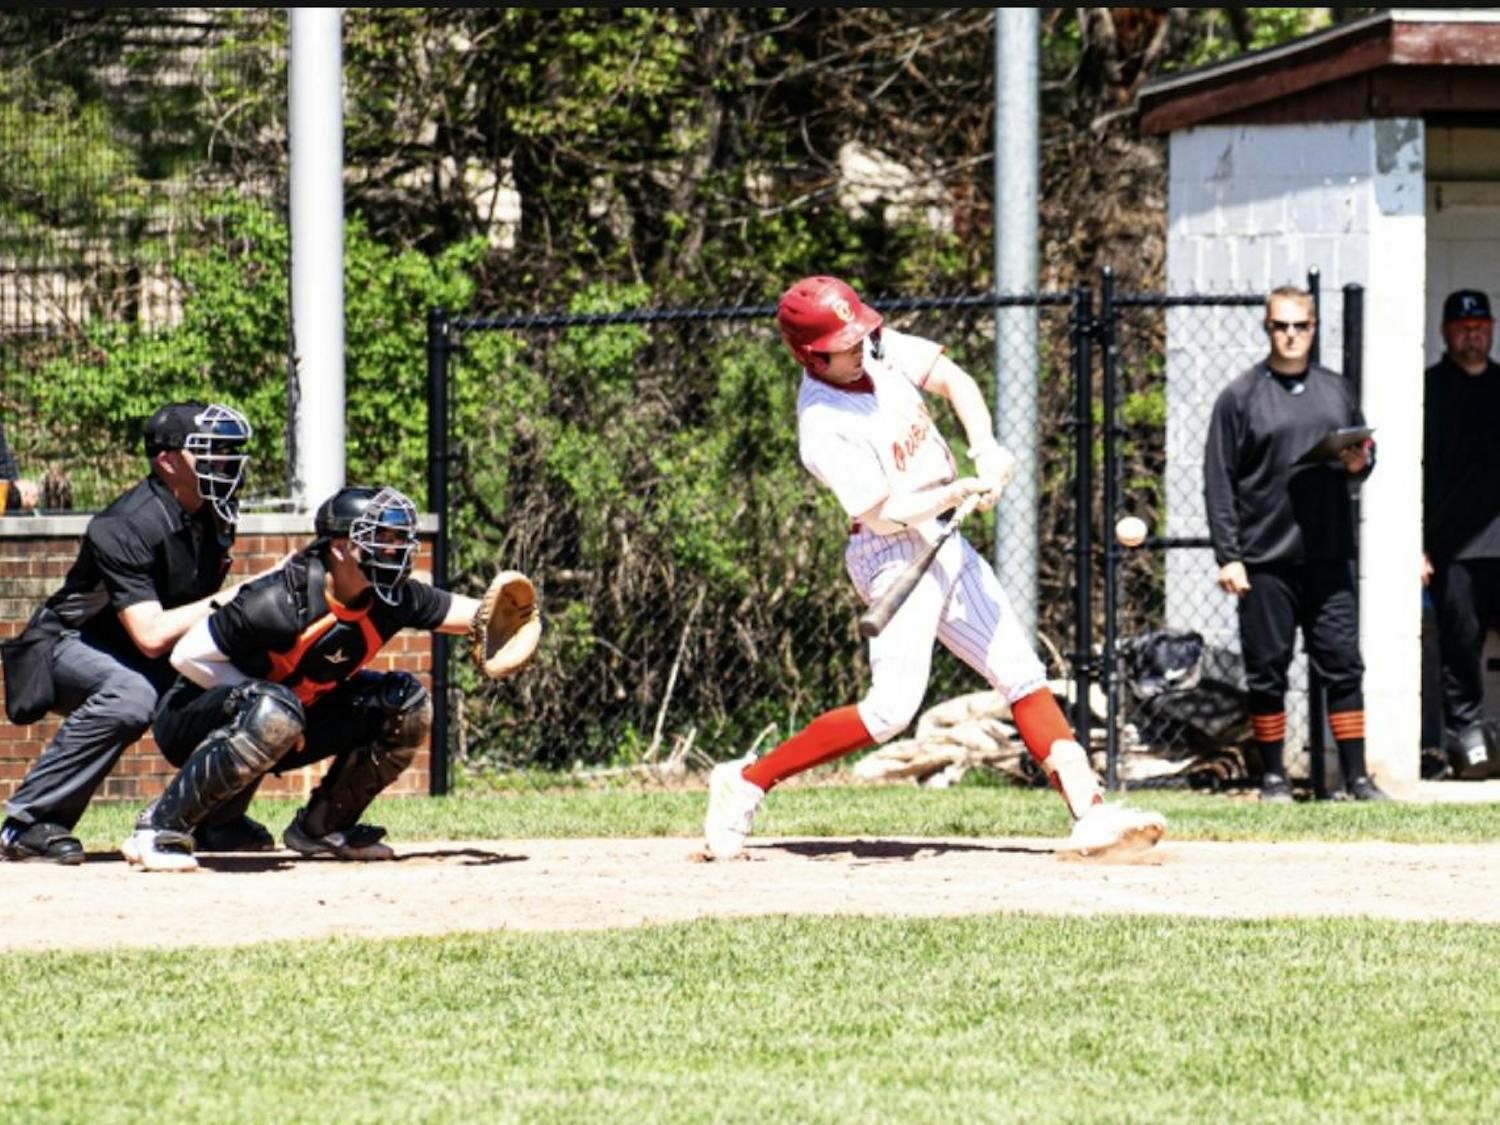 Quincel gets a hit at game against Heidelberg.jpg